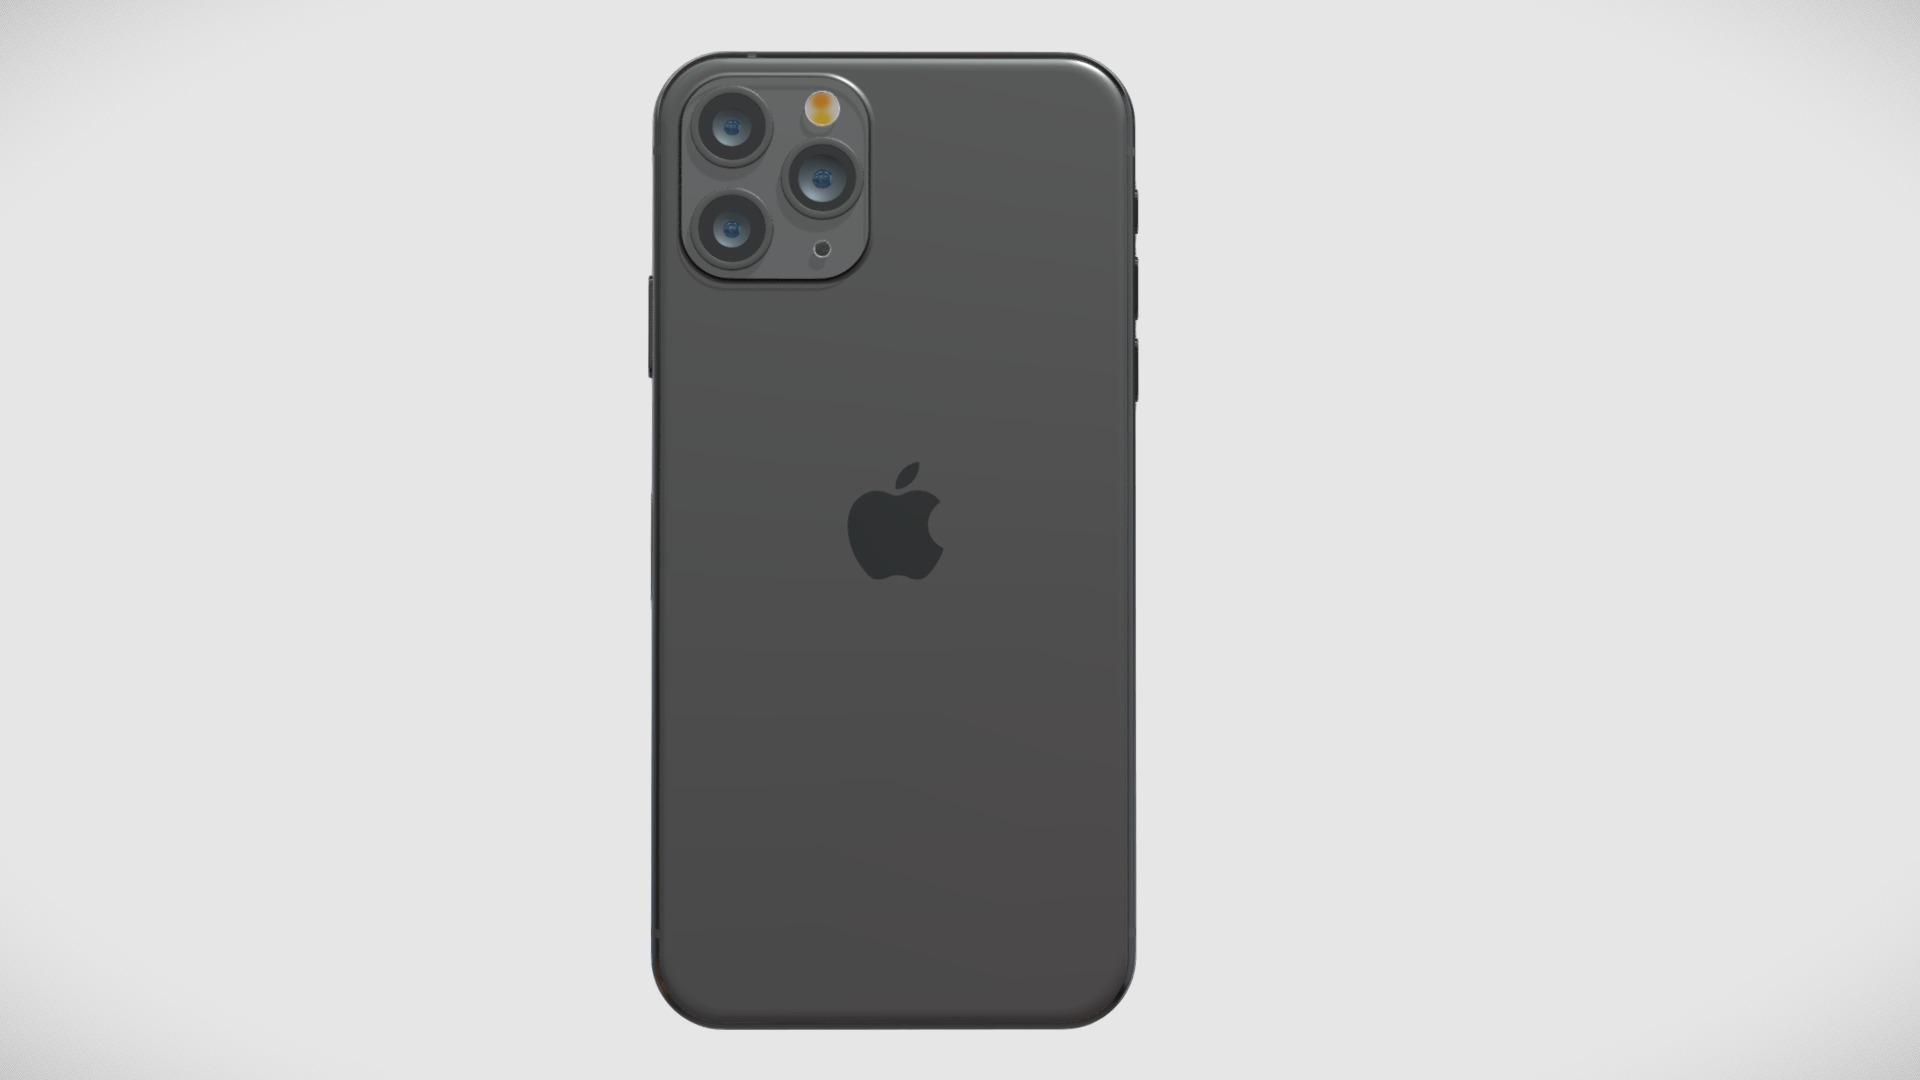 3D model Iphone 11 Pro Max Space Gray - This is a 3D model of the Iphone 11 Pro Max Space Gray. The 3D model is about a black cell phone.